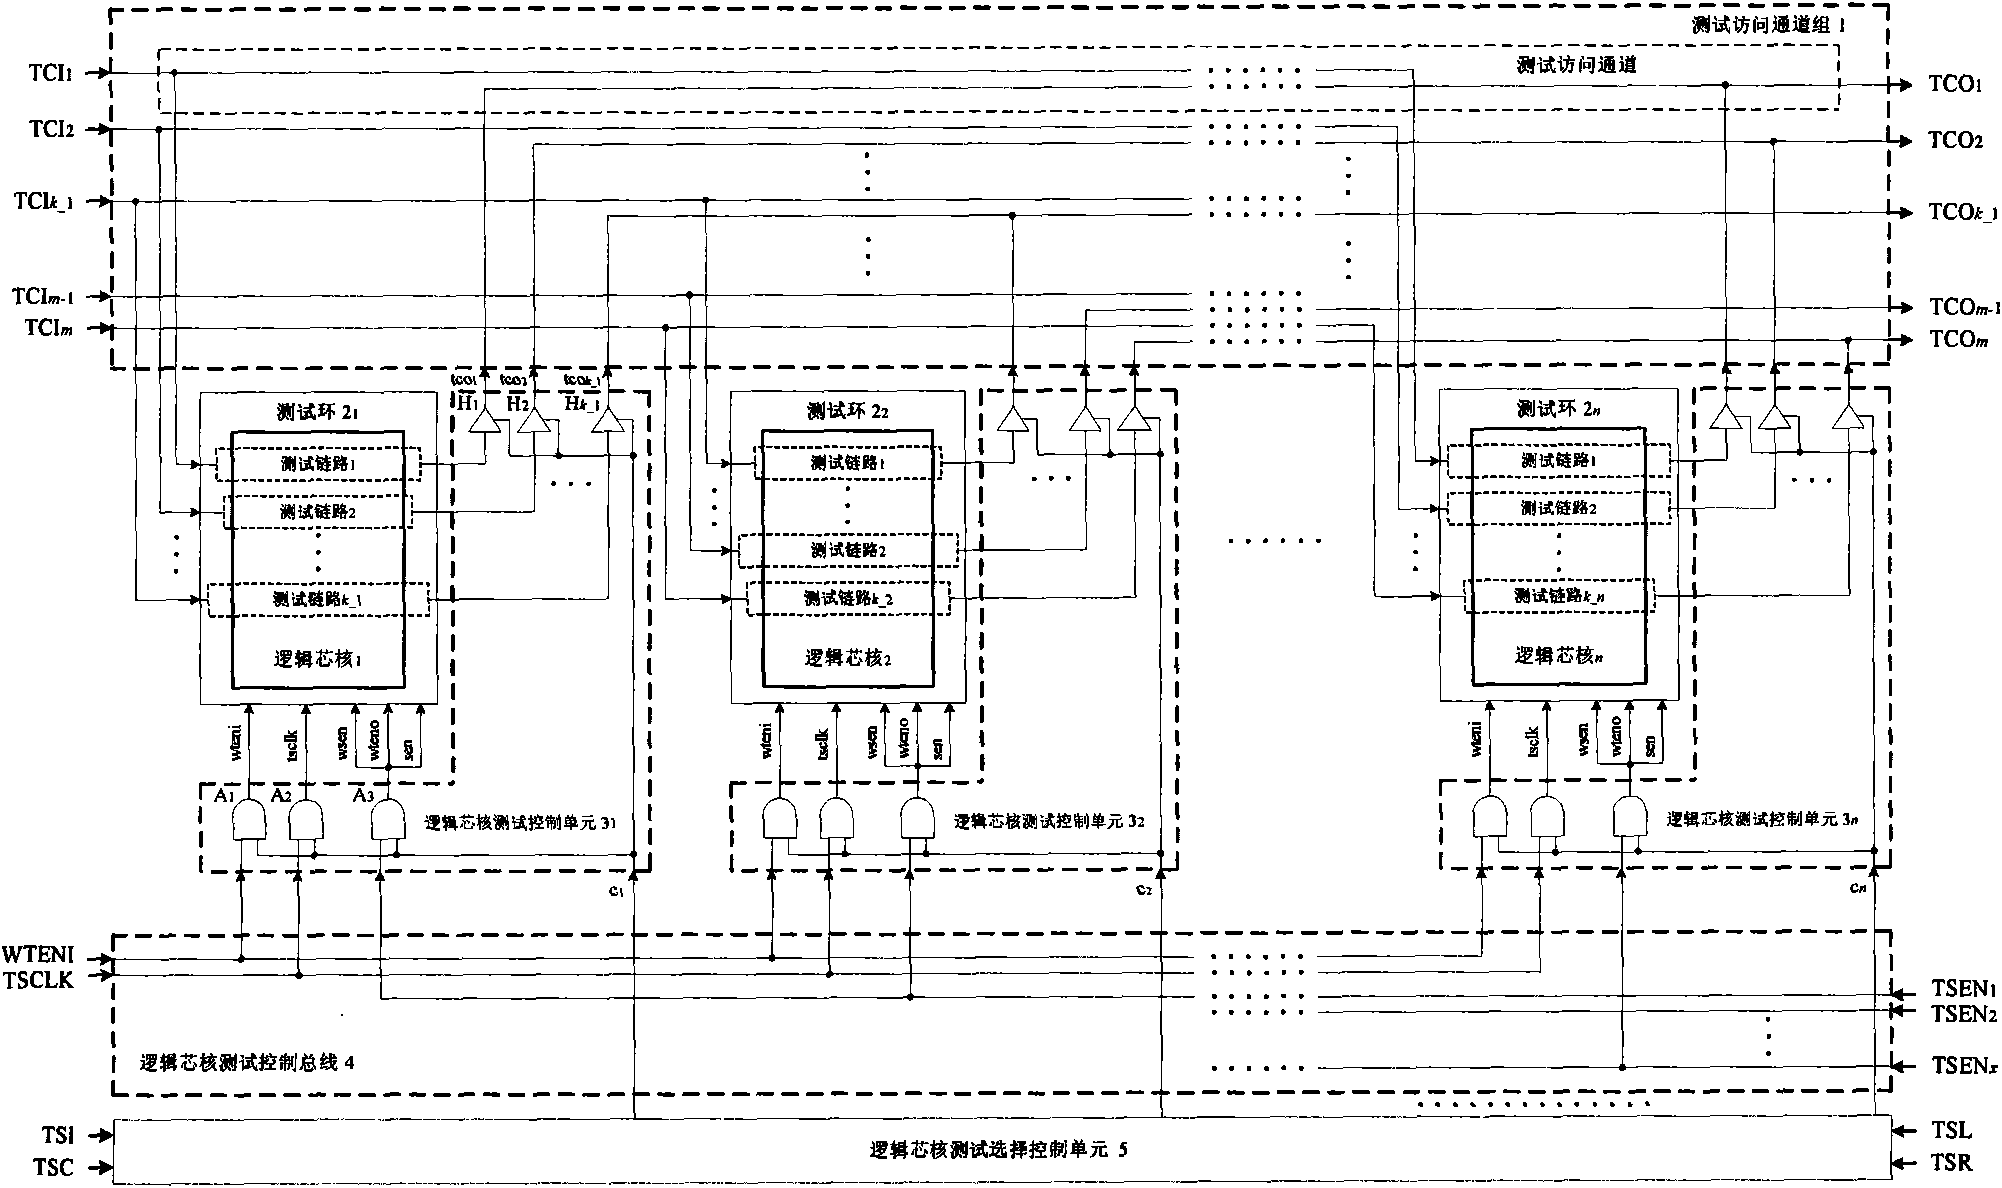 Failure testing system for embedded logic cores in system on chip